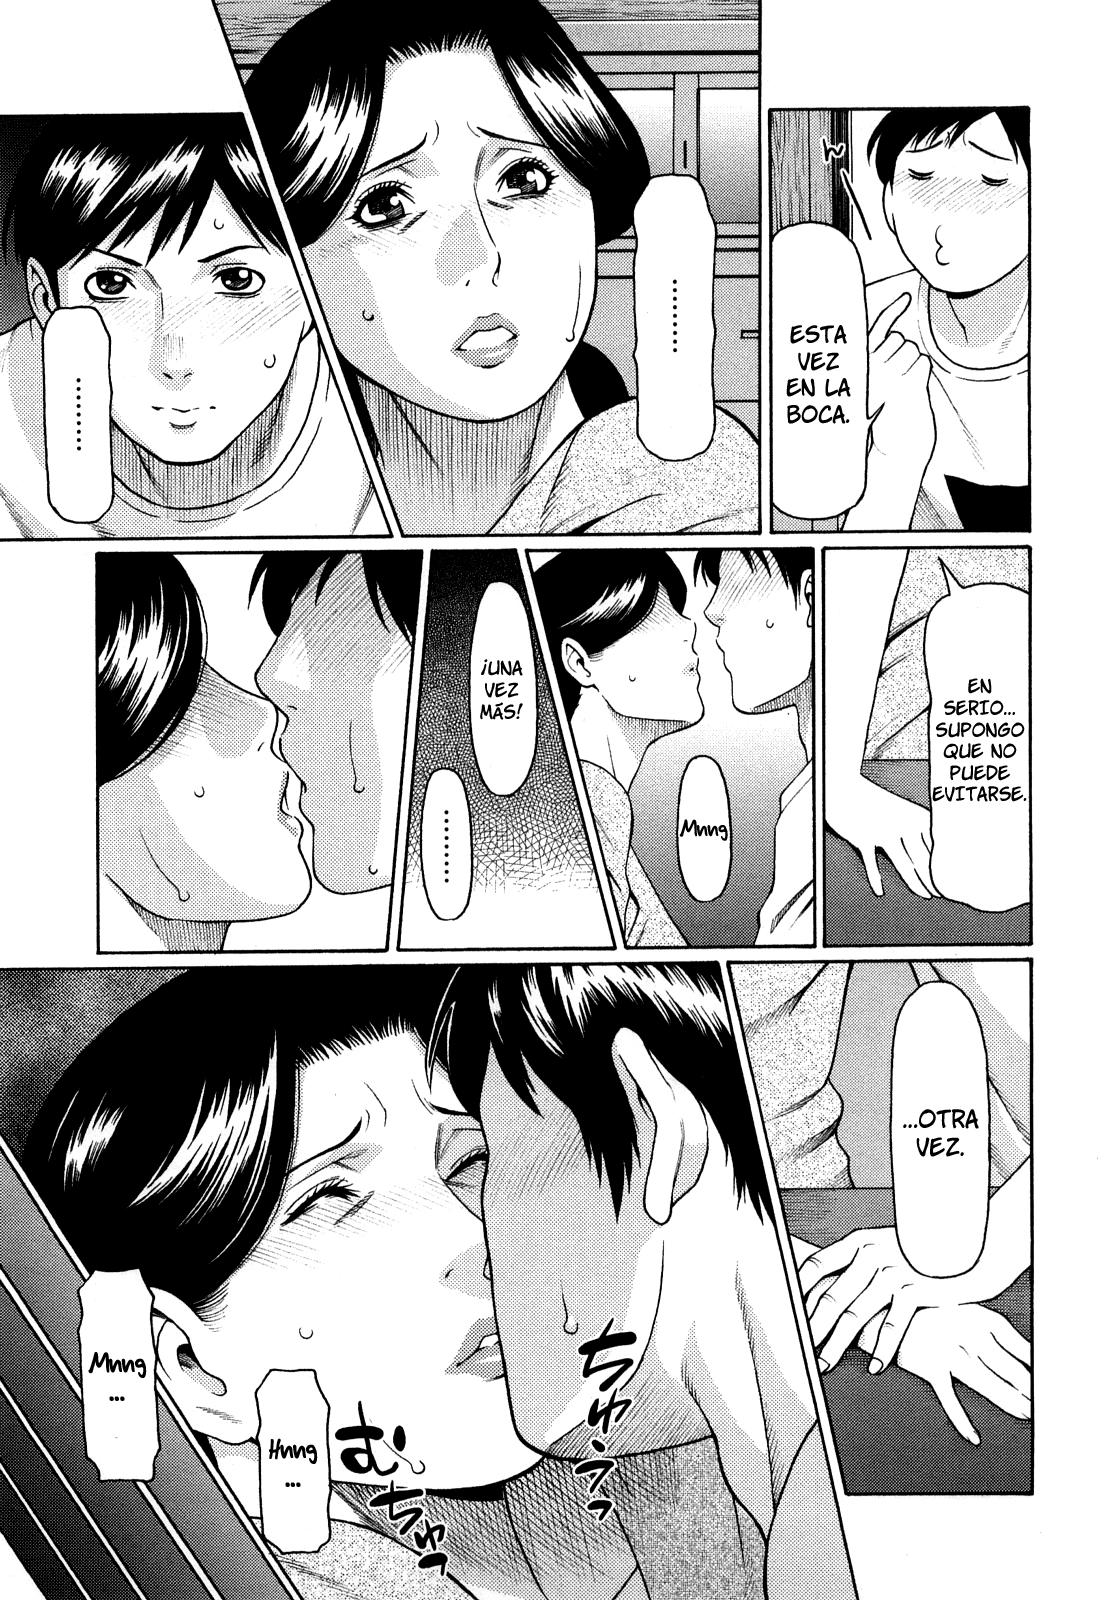 Immorality Love-Hole Completo (Sin Censura) Chapter-8 - 6